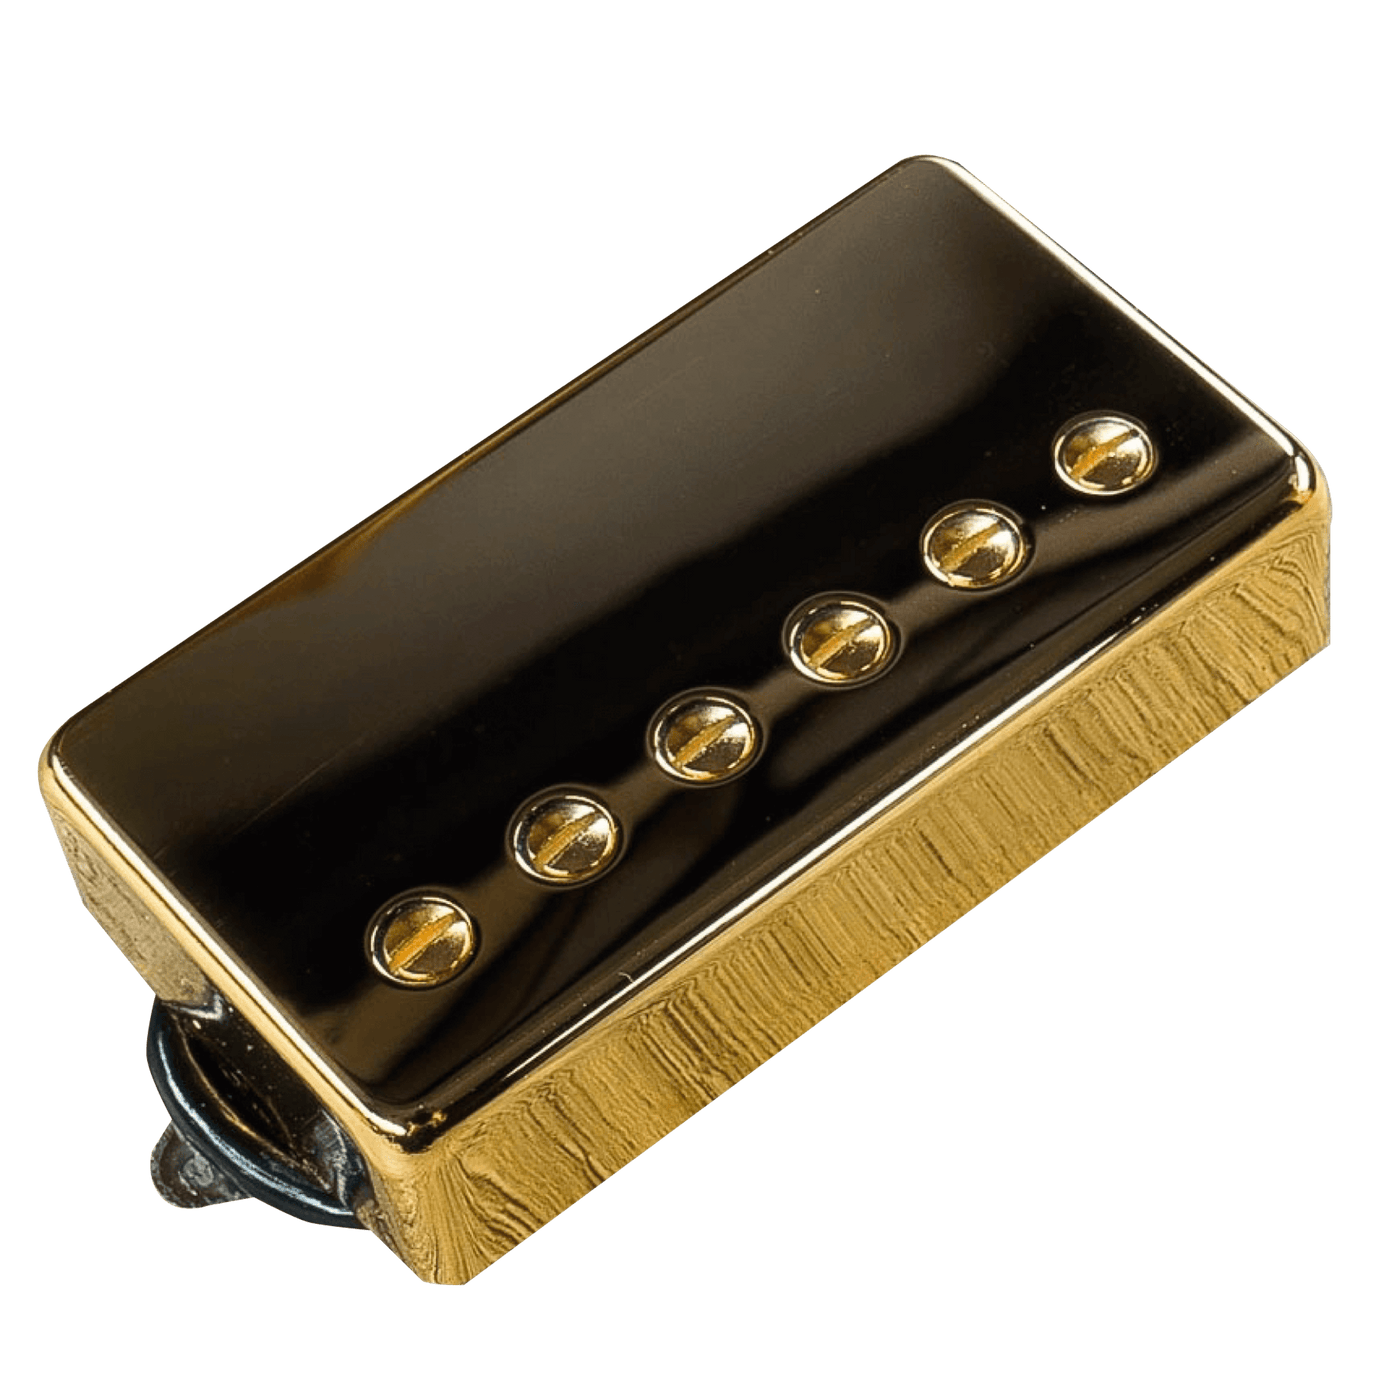 Suhr Aldrich Signature Humbucker Gold (Neck) - $189990 - Gearhub - The result of collaboration between John Suhr and rock guitarist extraordinaire Doug Aldrich, the Aldrich humbuckers are the ultimate high-output pickups for aggressive rock style of playing. The Aldrich bridge humbucker is now our highest output pickup but it oozes tone across its sound spectrum Spacing • 50mm DC Resistance • 9K Ω Hook Up Wire • 4-Conductor Magnet • Alnico V Special